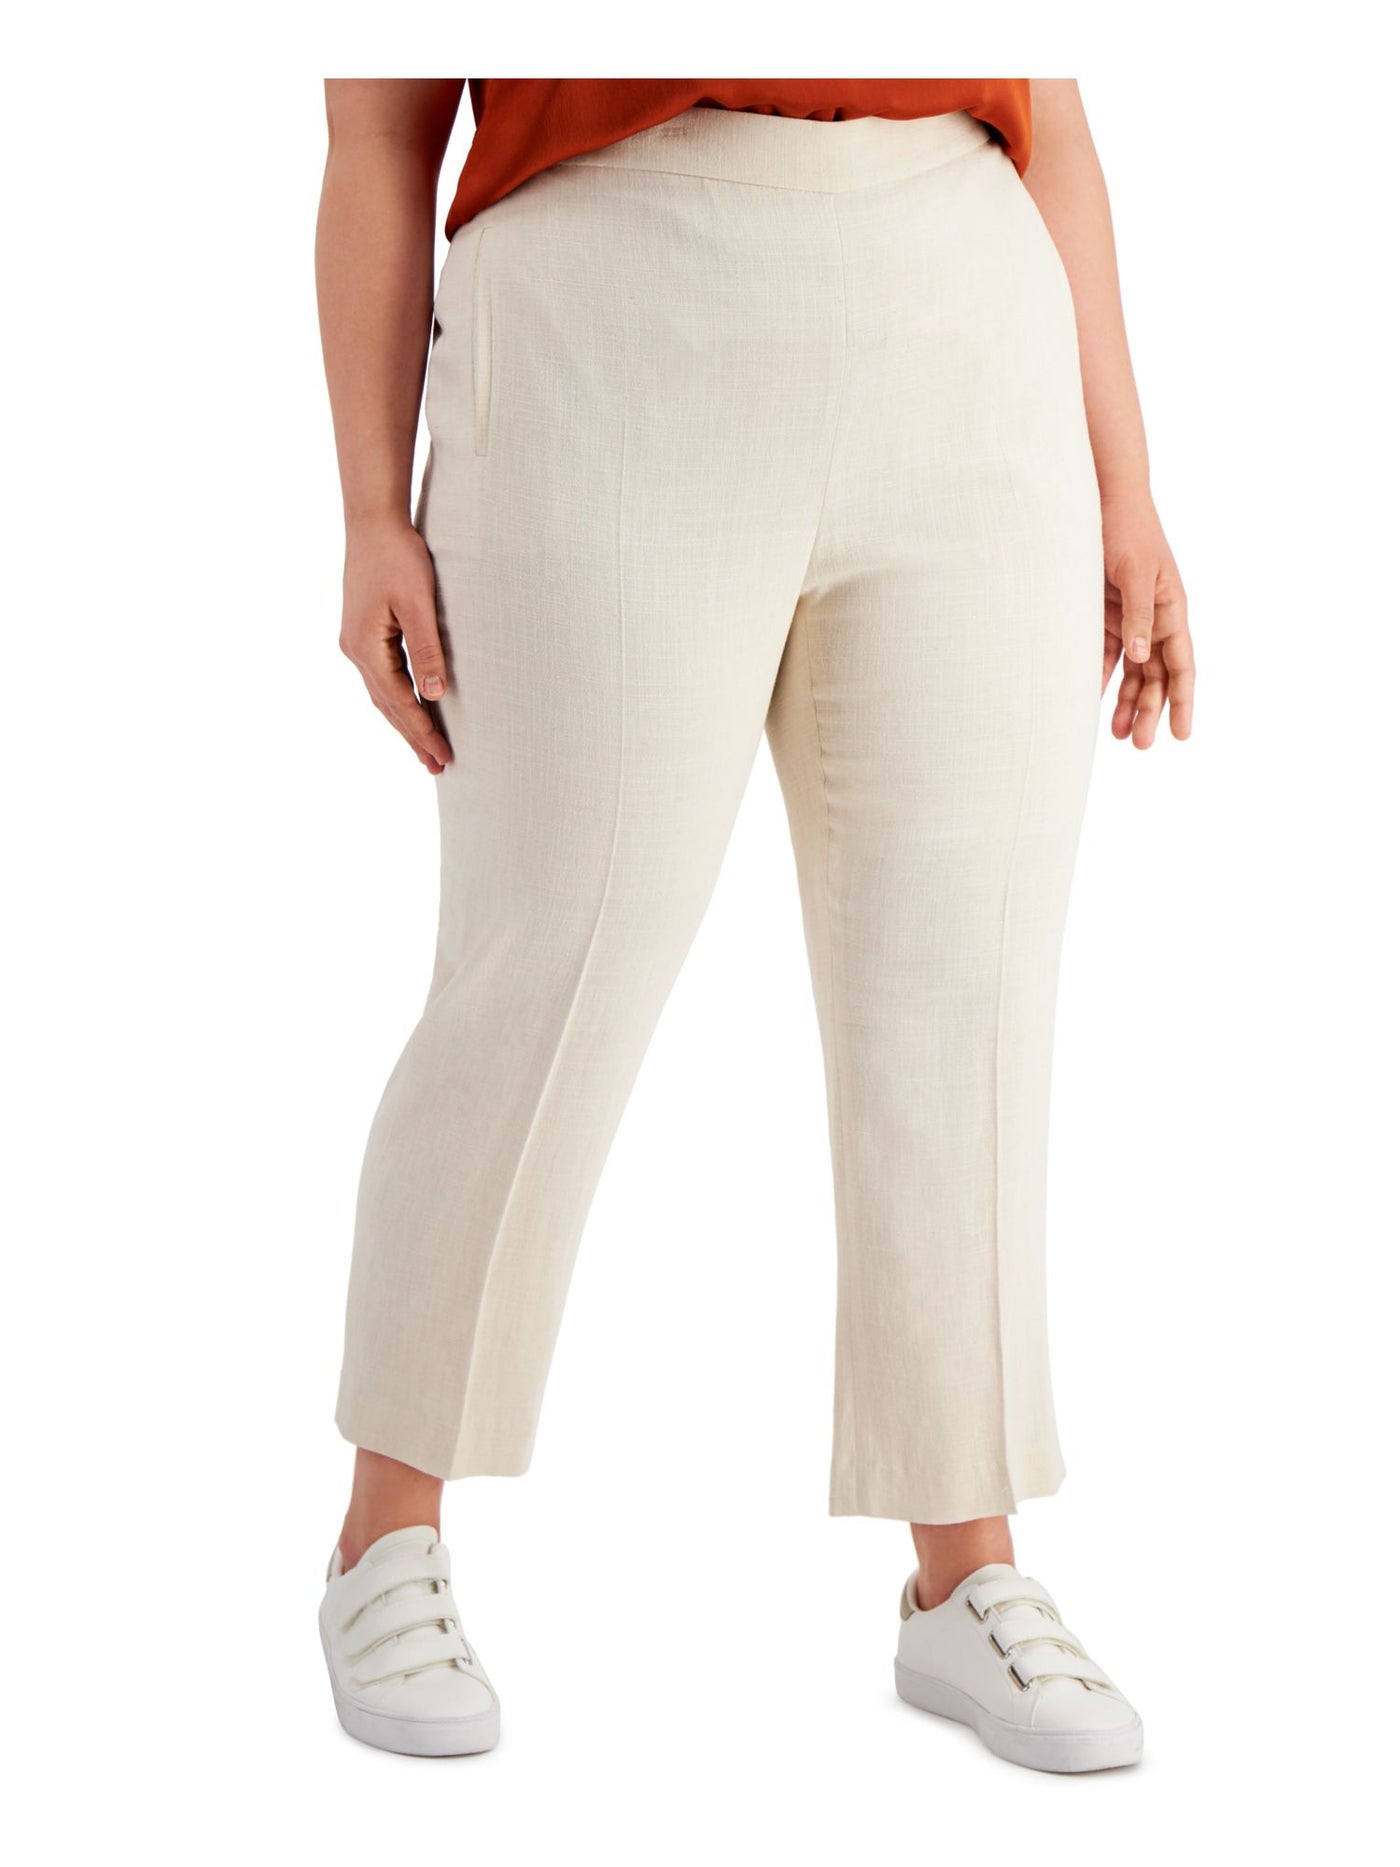 BAR III Womens Beige Textured Pocketed Pull On Style Wear To Work High Waist Pants Plus 20W